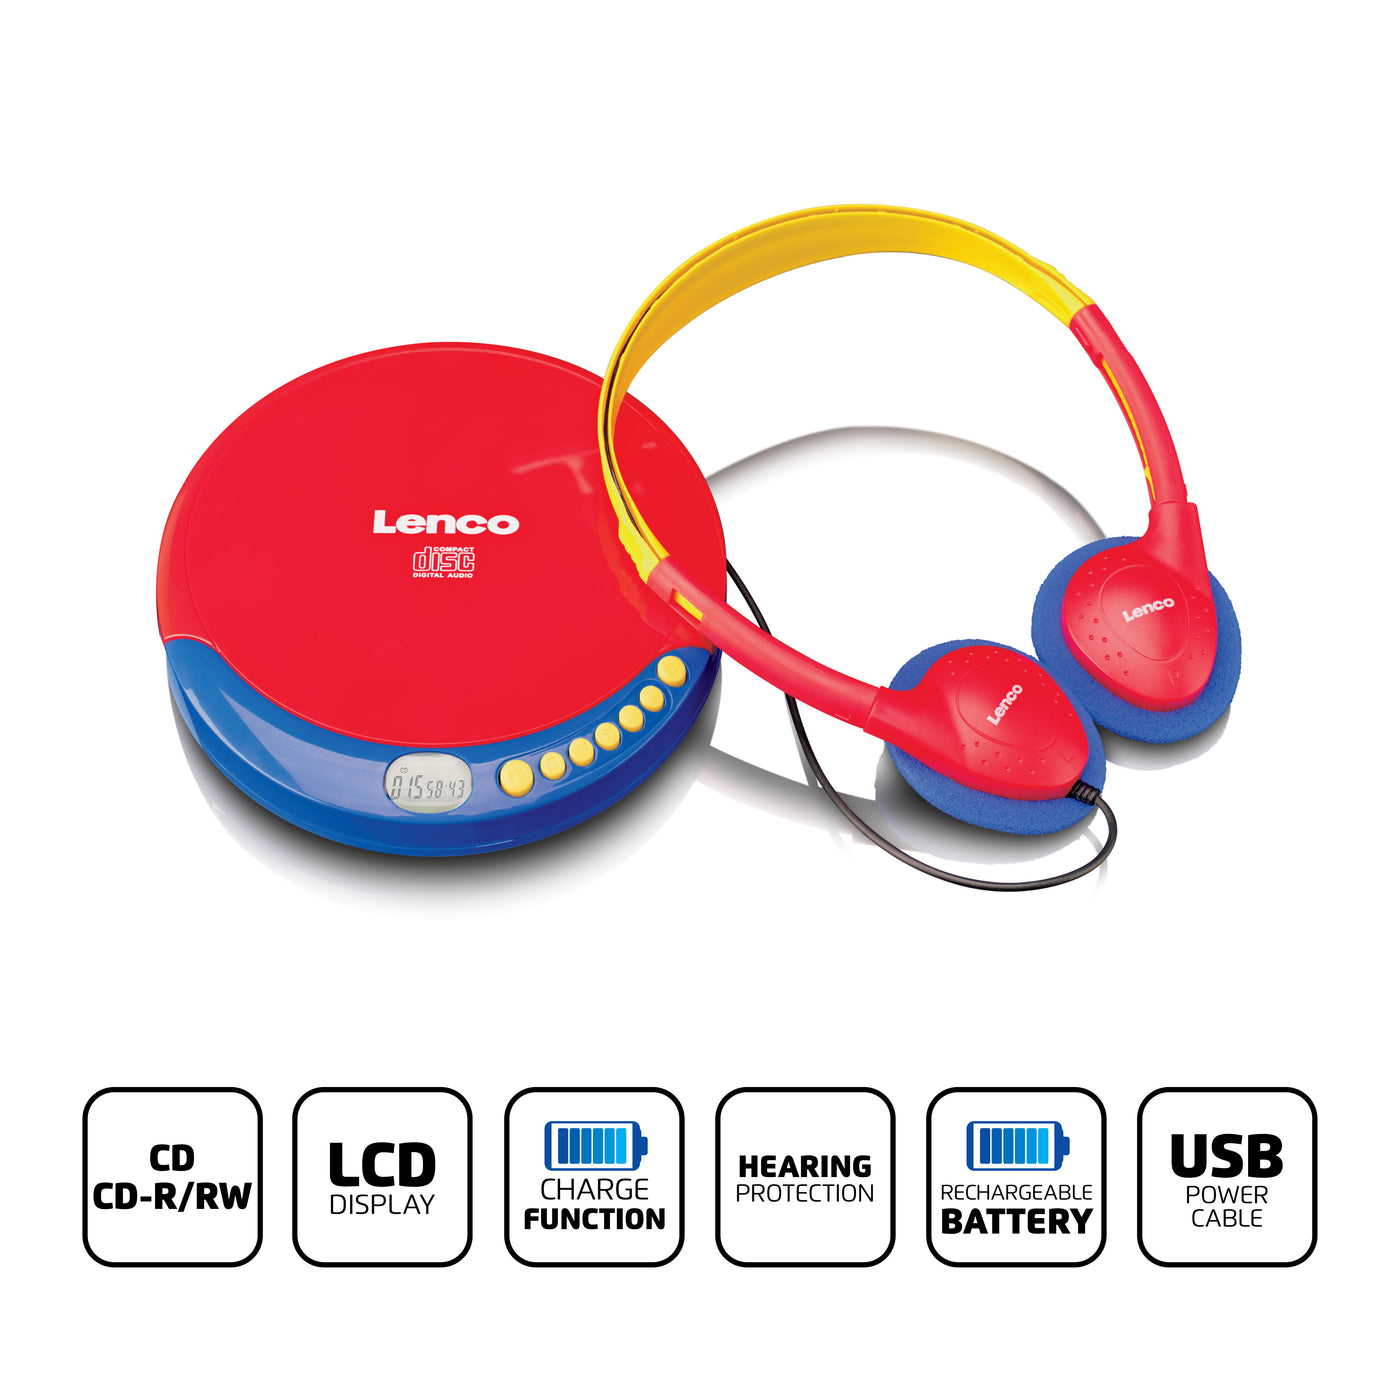 LENCO CD-021KIDS - Portable CD player for children with kids headphones, rechargeable batteries, and built-in sound limiter - Multicoloured